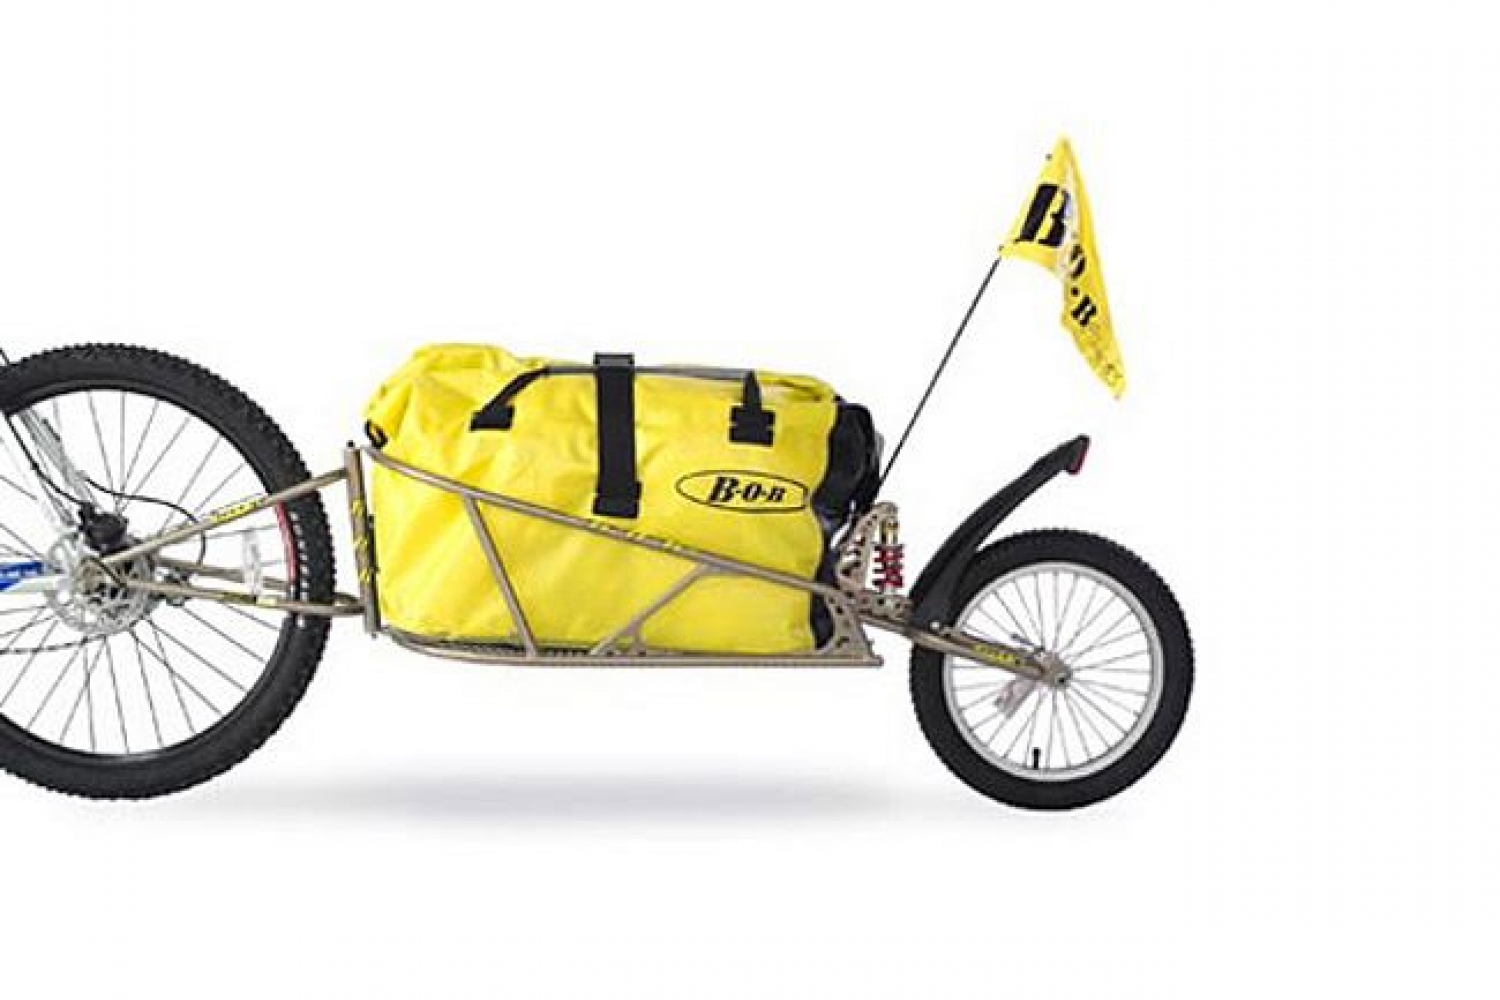 Diverse Cargo and Child Bike Trailers